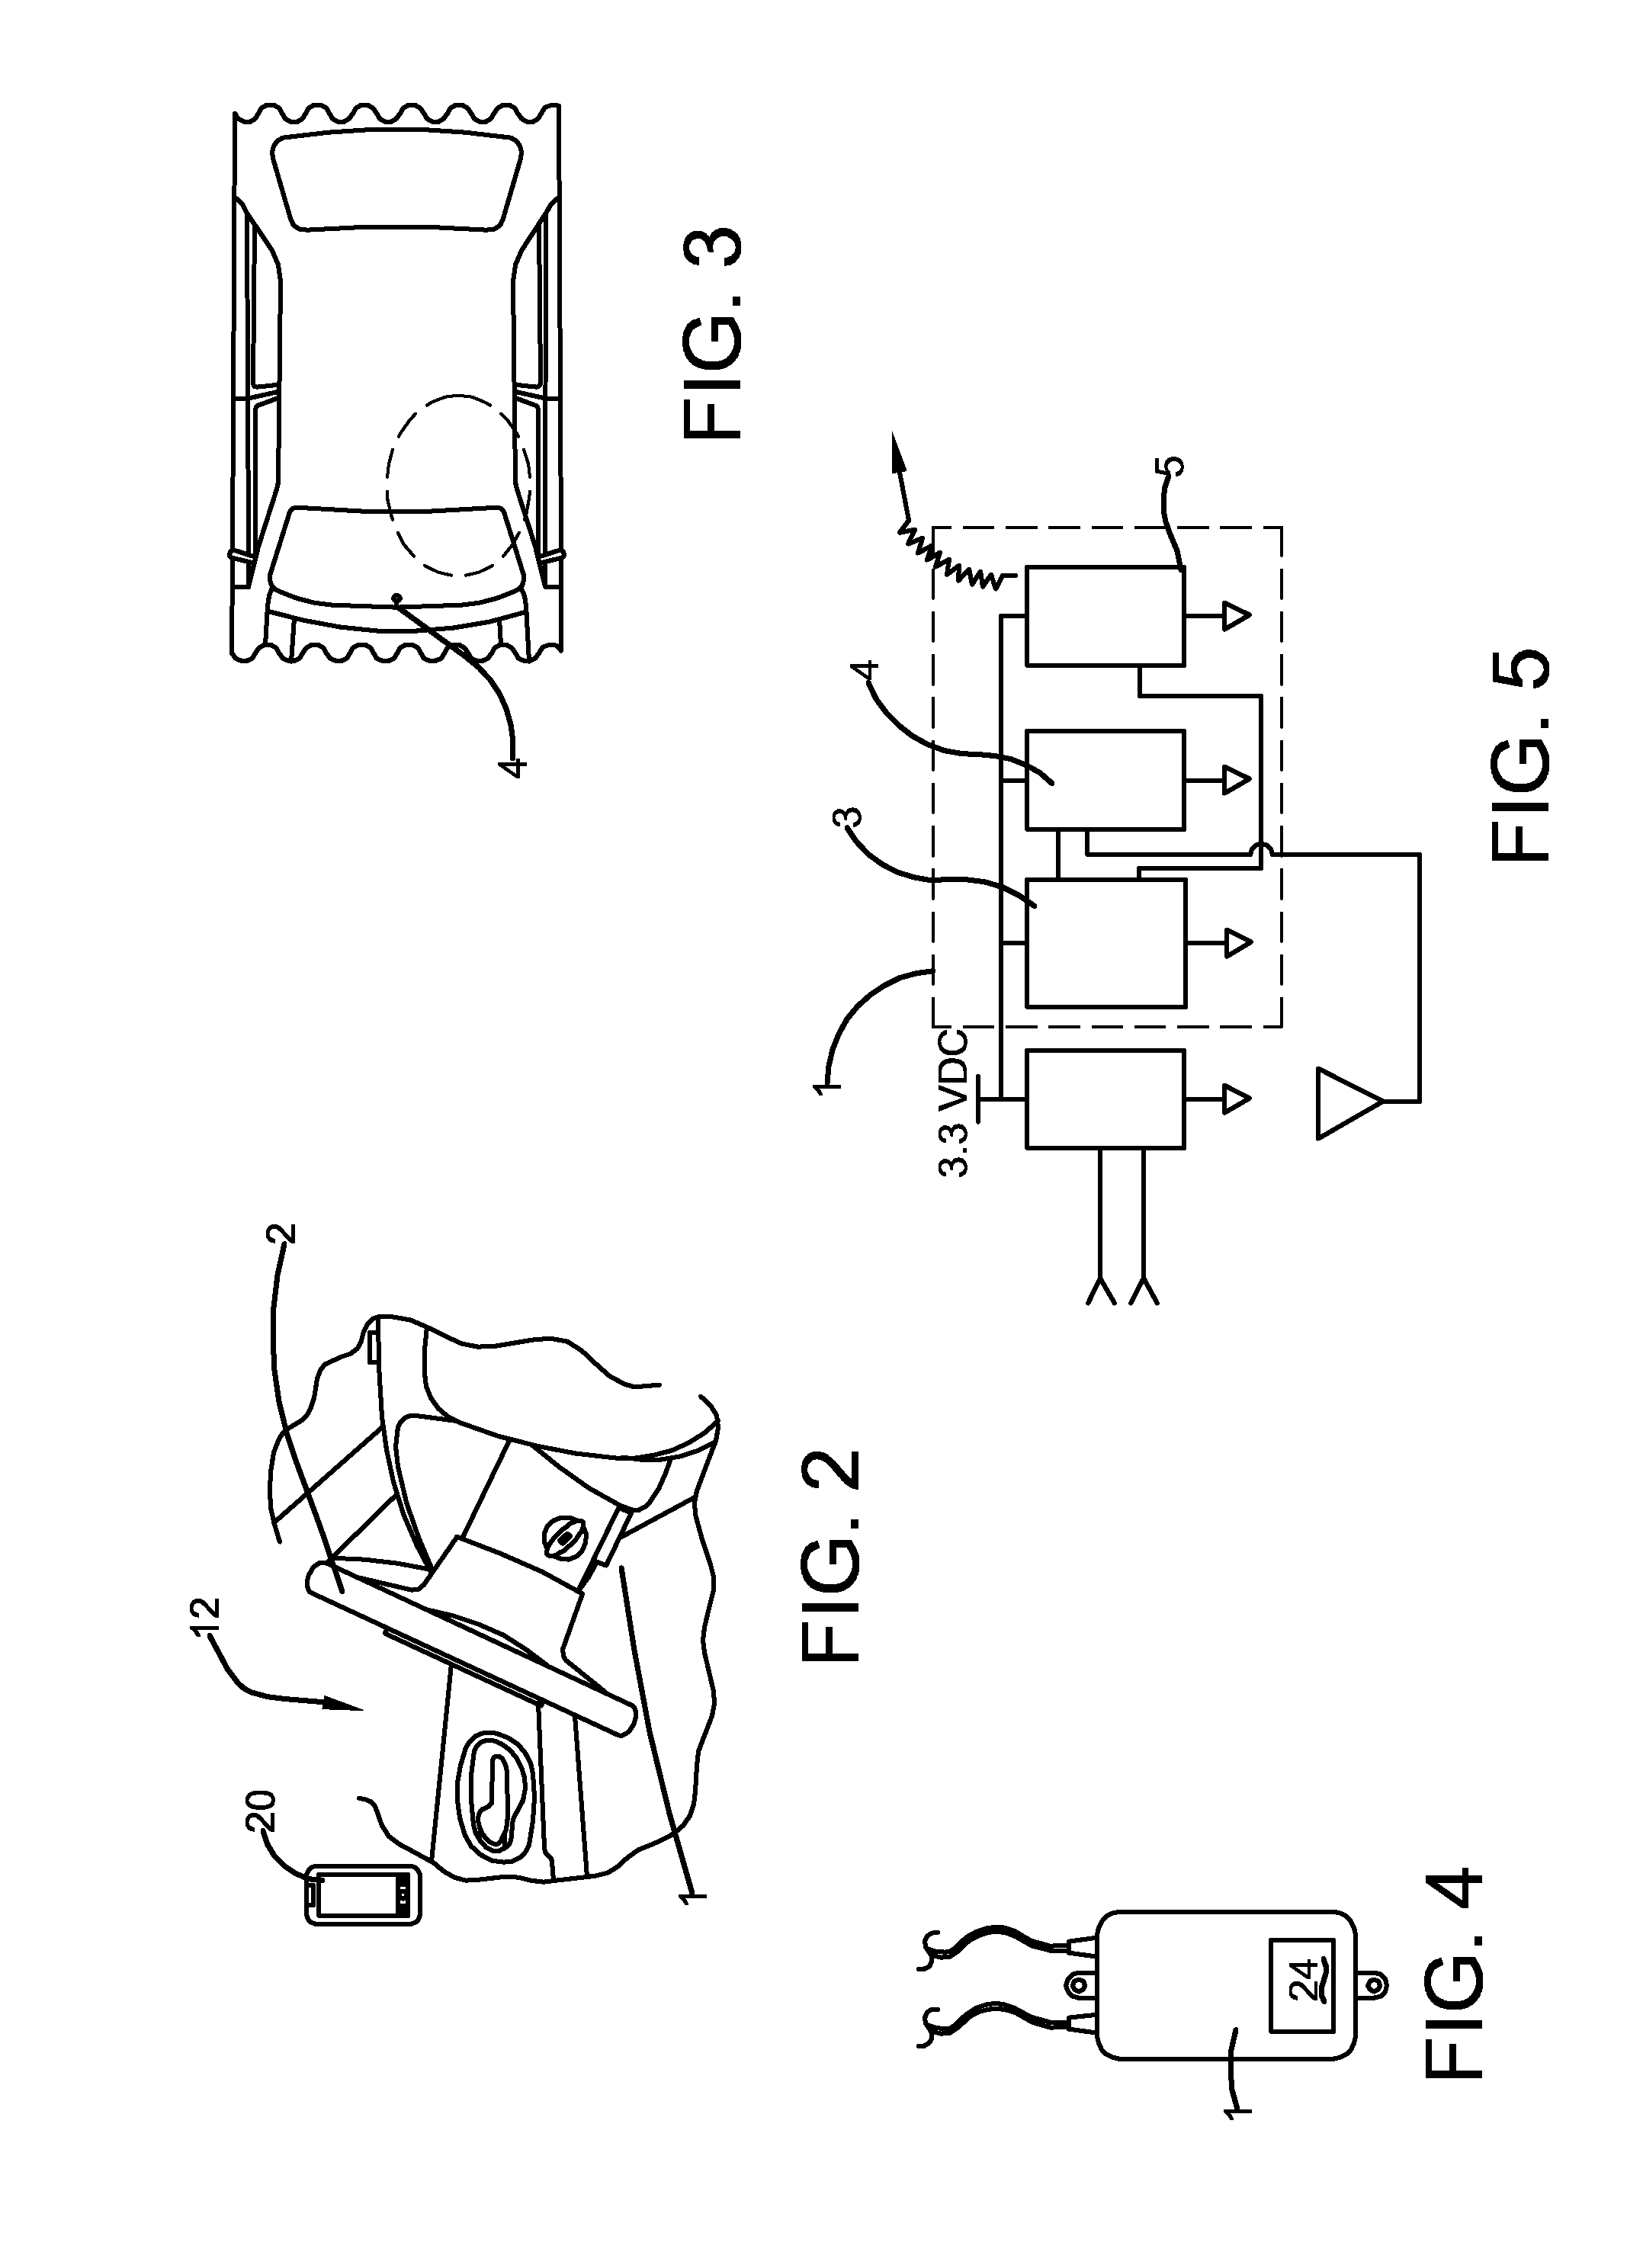 Method and apparatus for disabling certain communication features of a vehicle drivers wireless phone